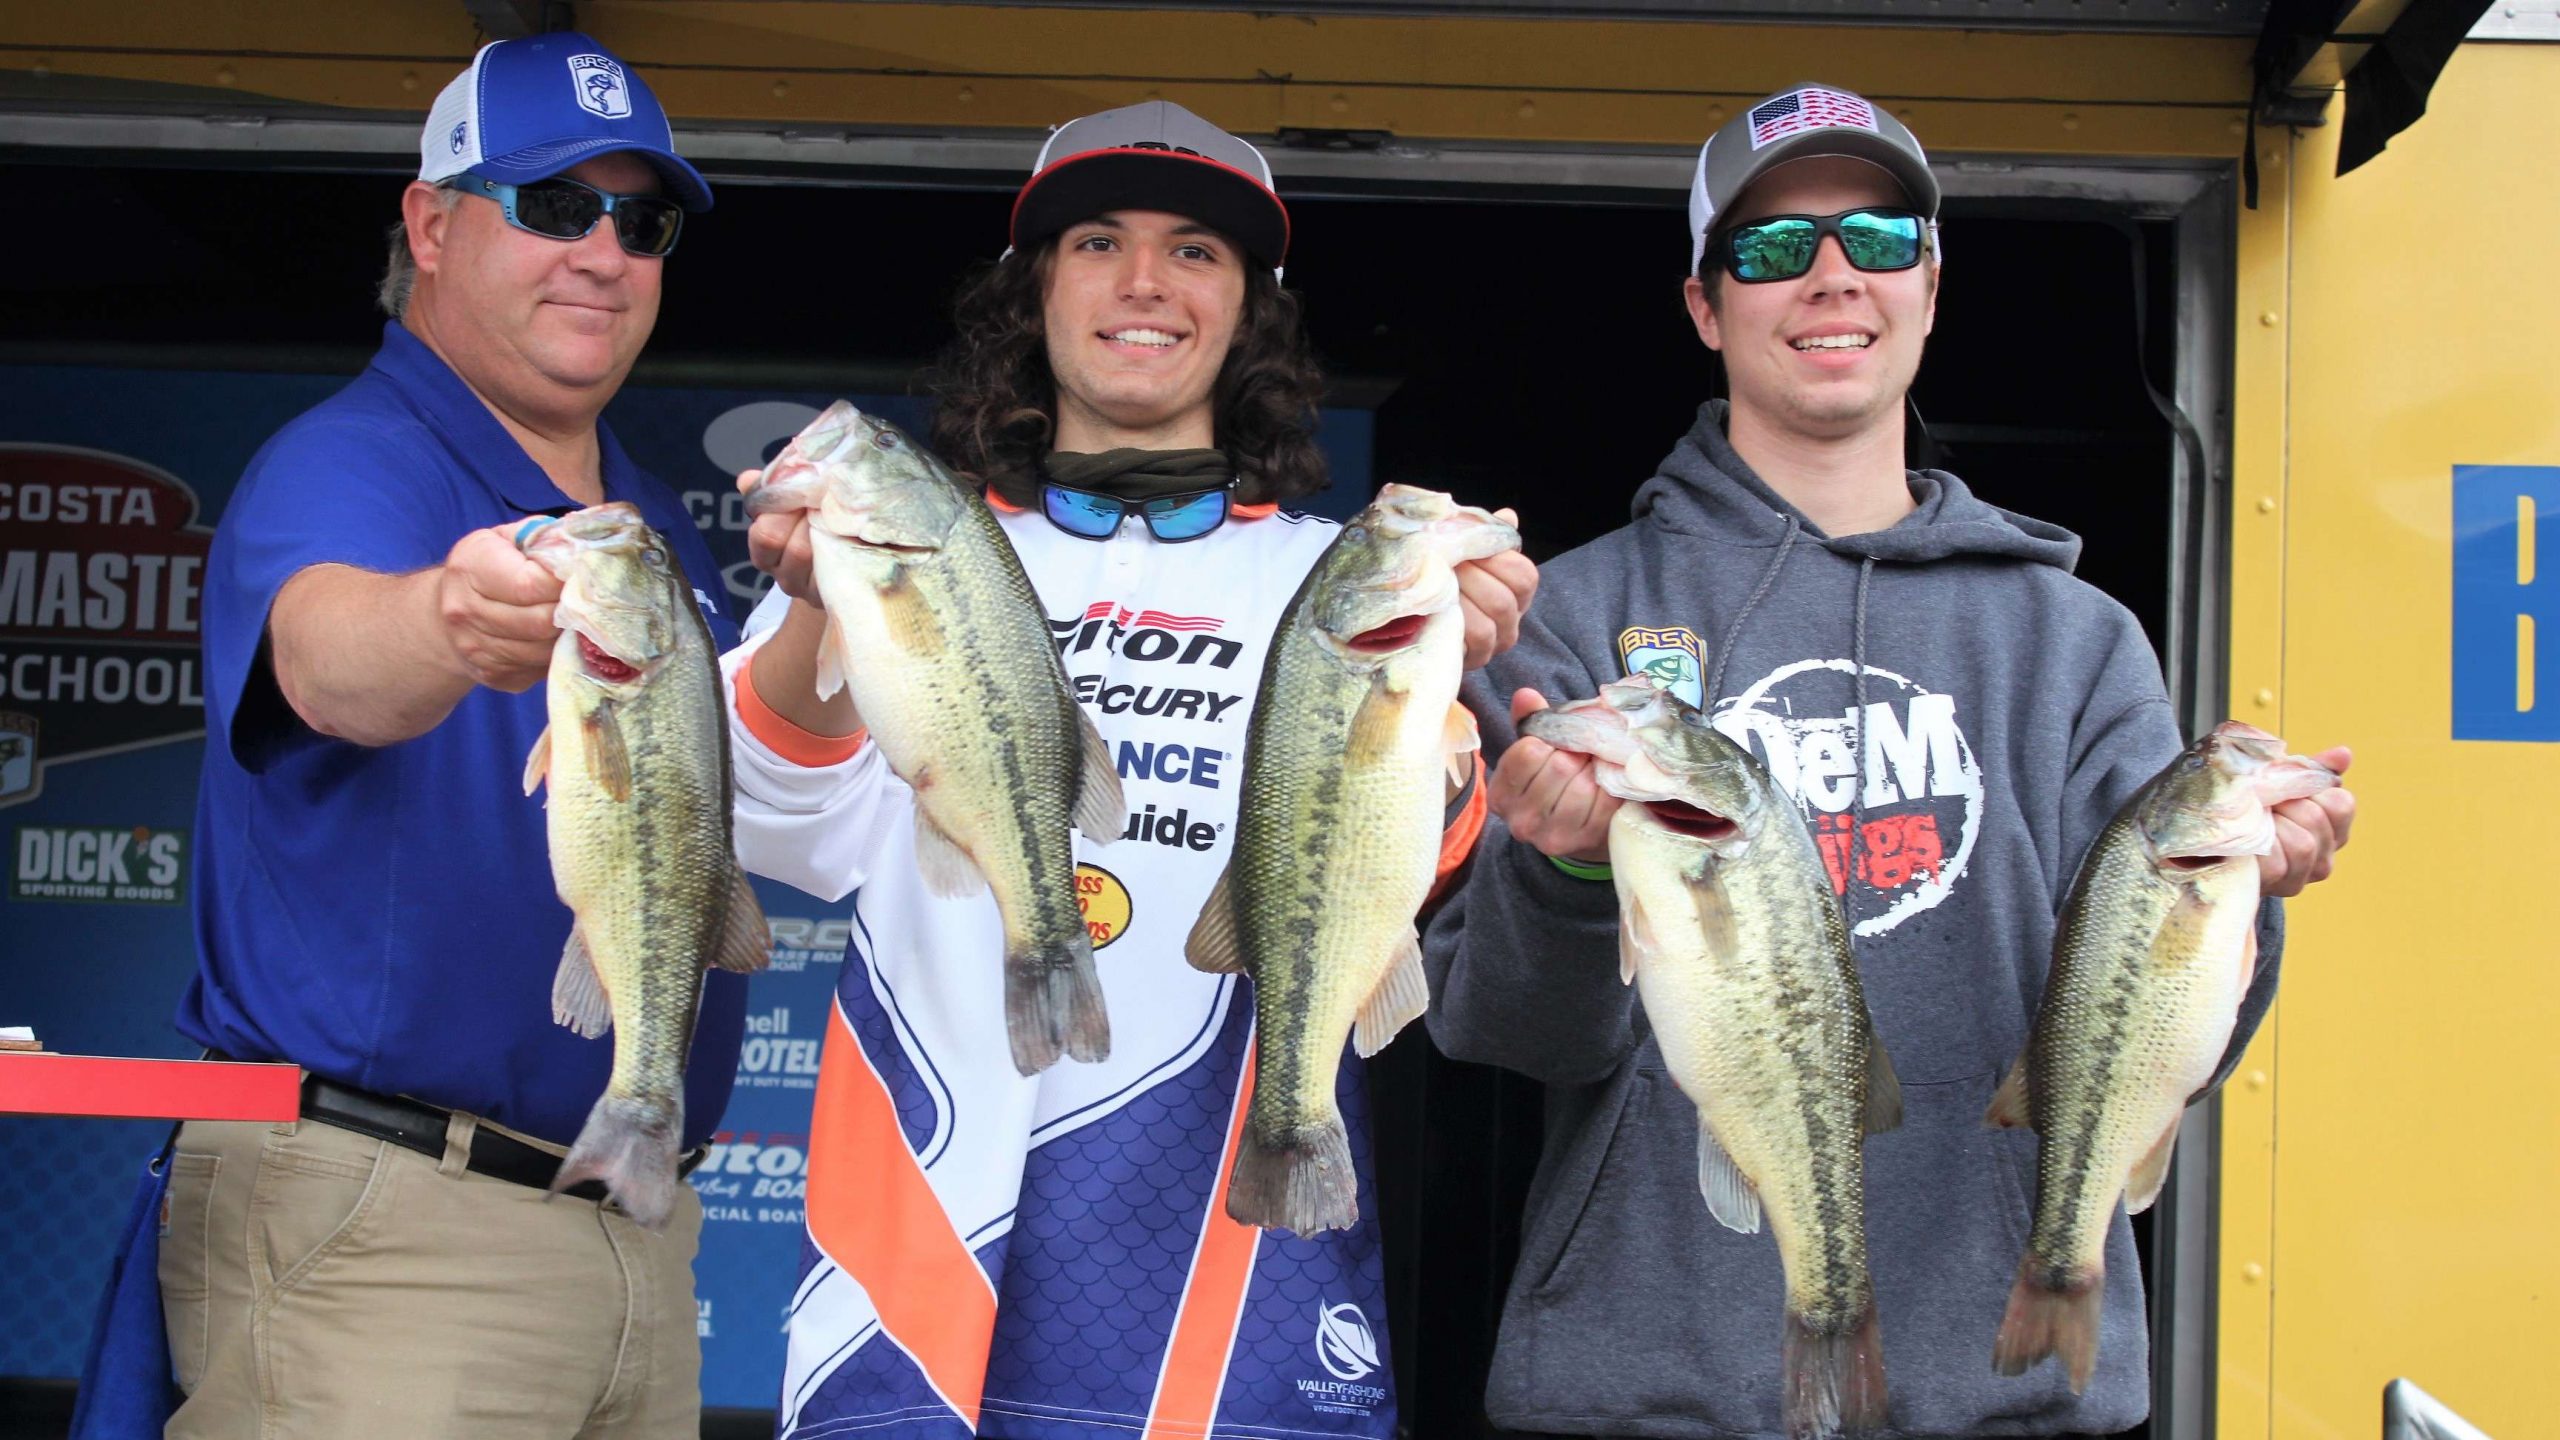 But the 14-1 limit weighed by Tyler Lubbat and Nolan Siara of the Buffalo Grove (Ill.) Bass Fishing Club is not enough to bump the leaders from atop the board.